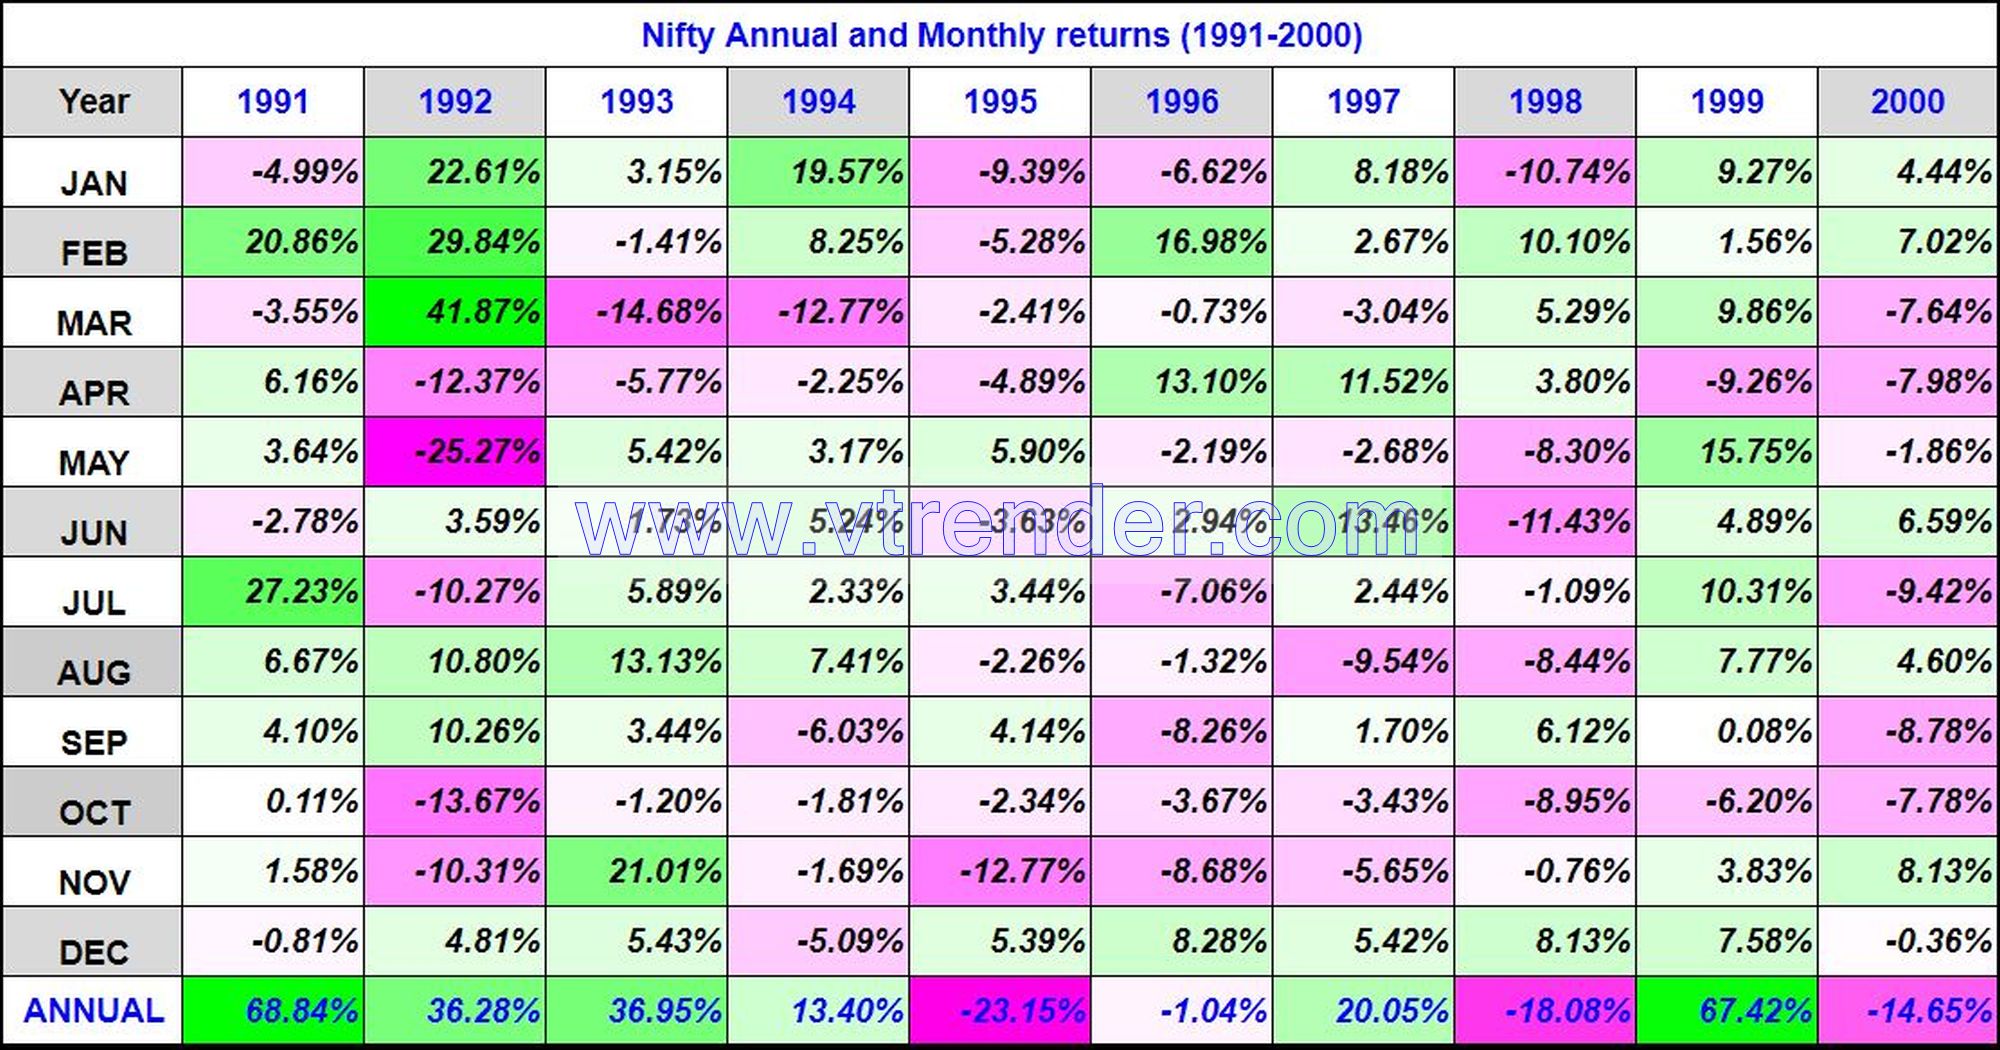 Niftyreturns1991 2000 Nifty 50 Monthly And Annual Returns (1991-2023) Updated 31St Mar 2023 Annual, Monthly, Nifty Returns